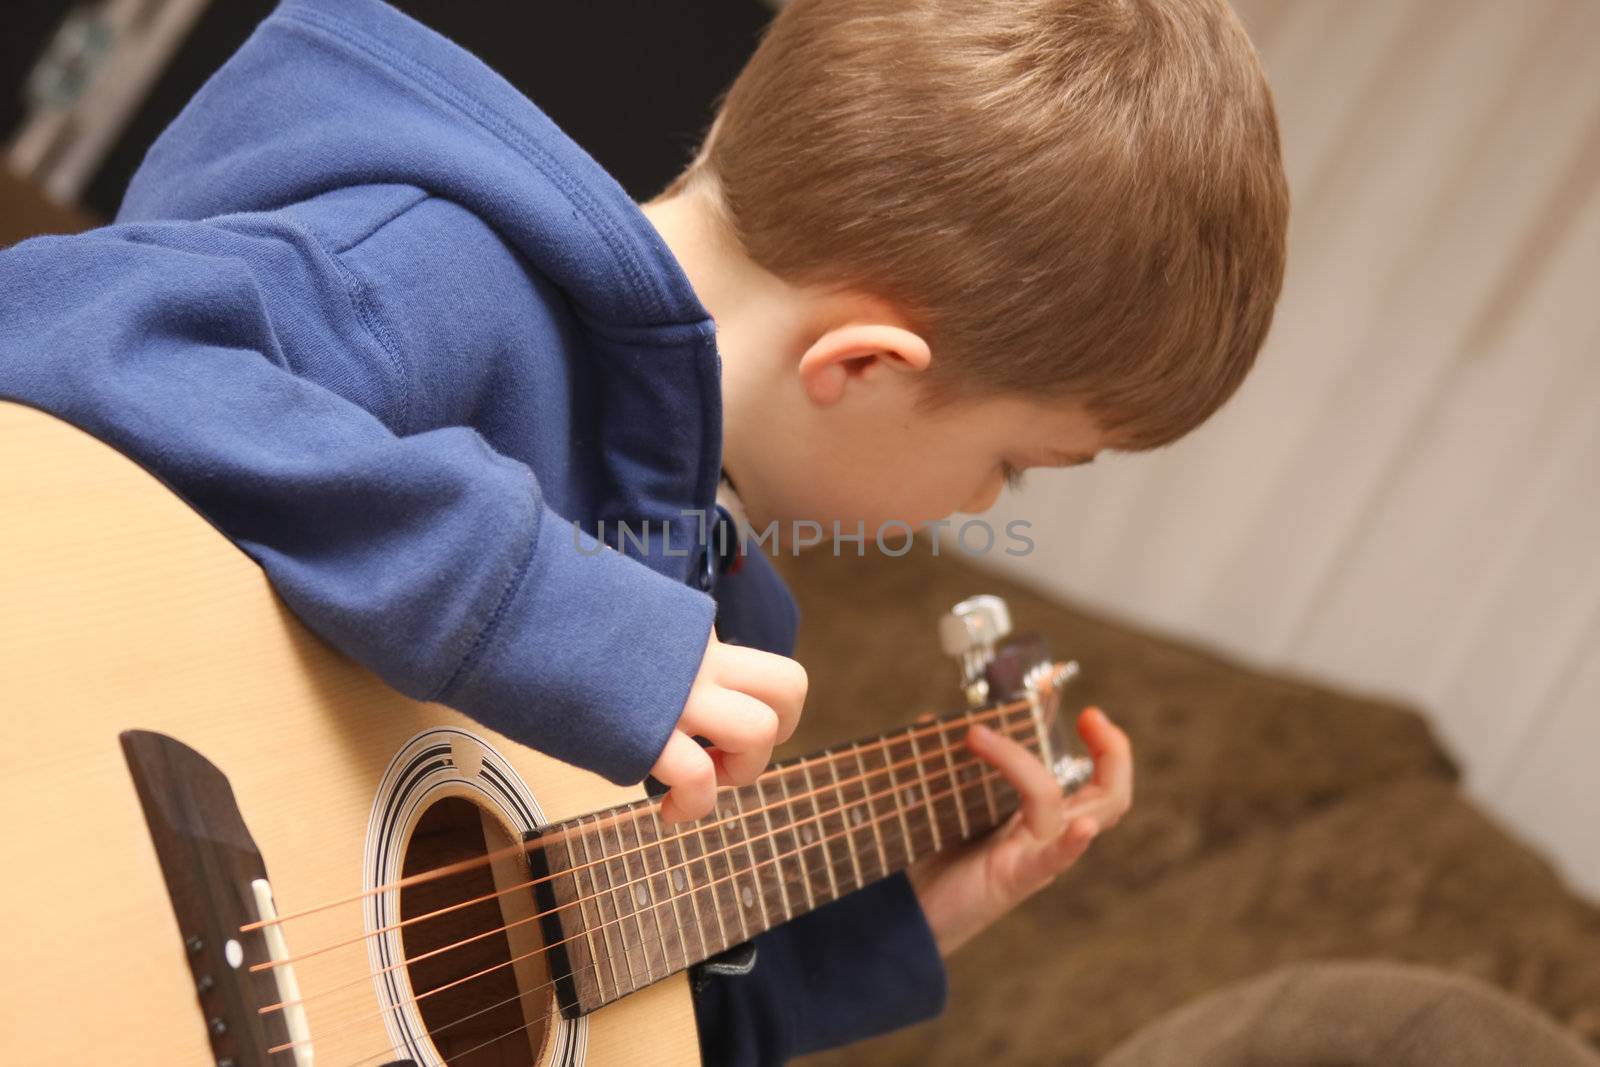 Young Boy strumming the guitar during lessons.